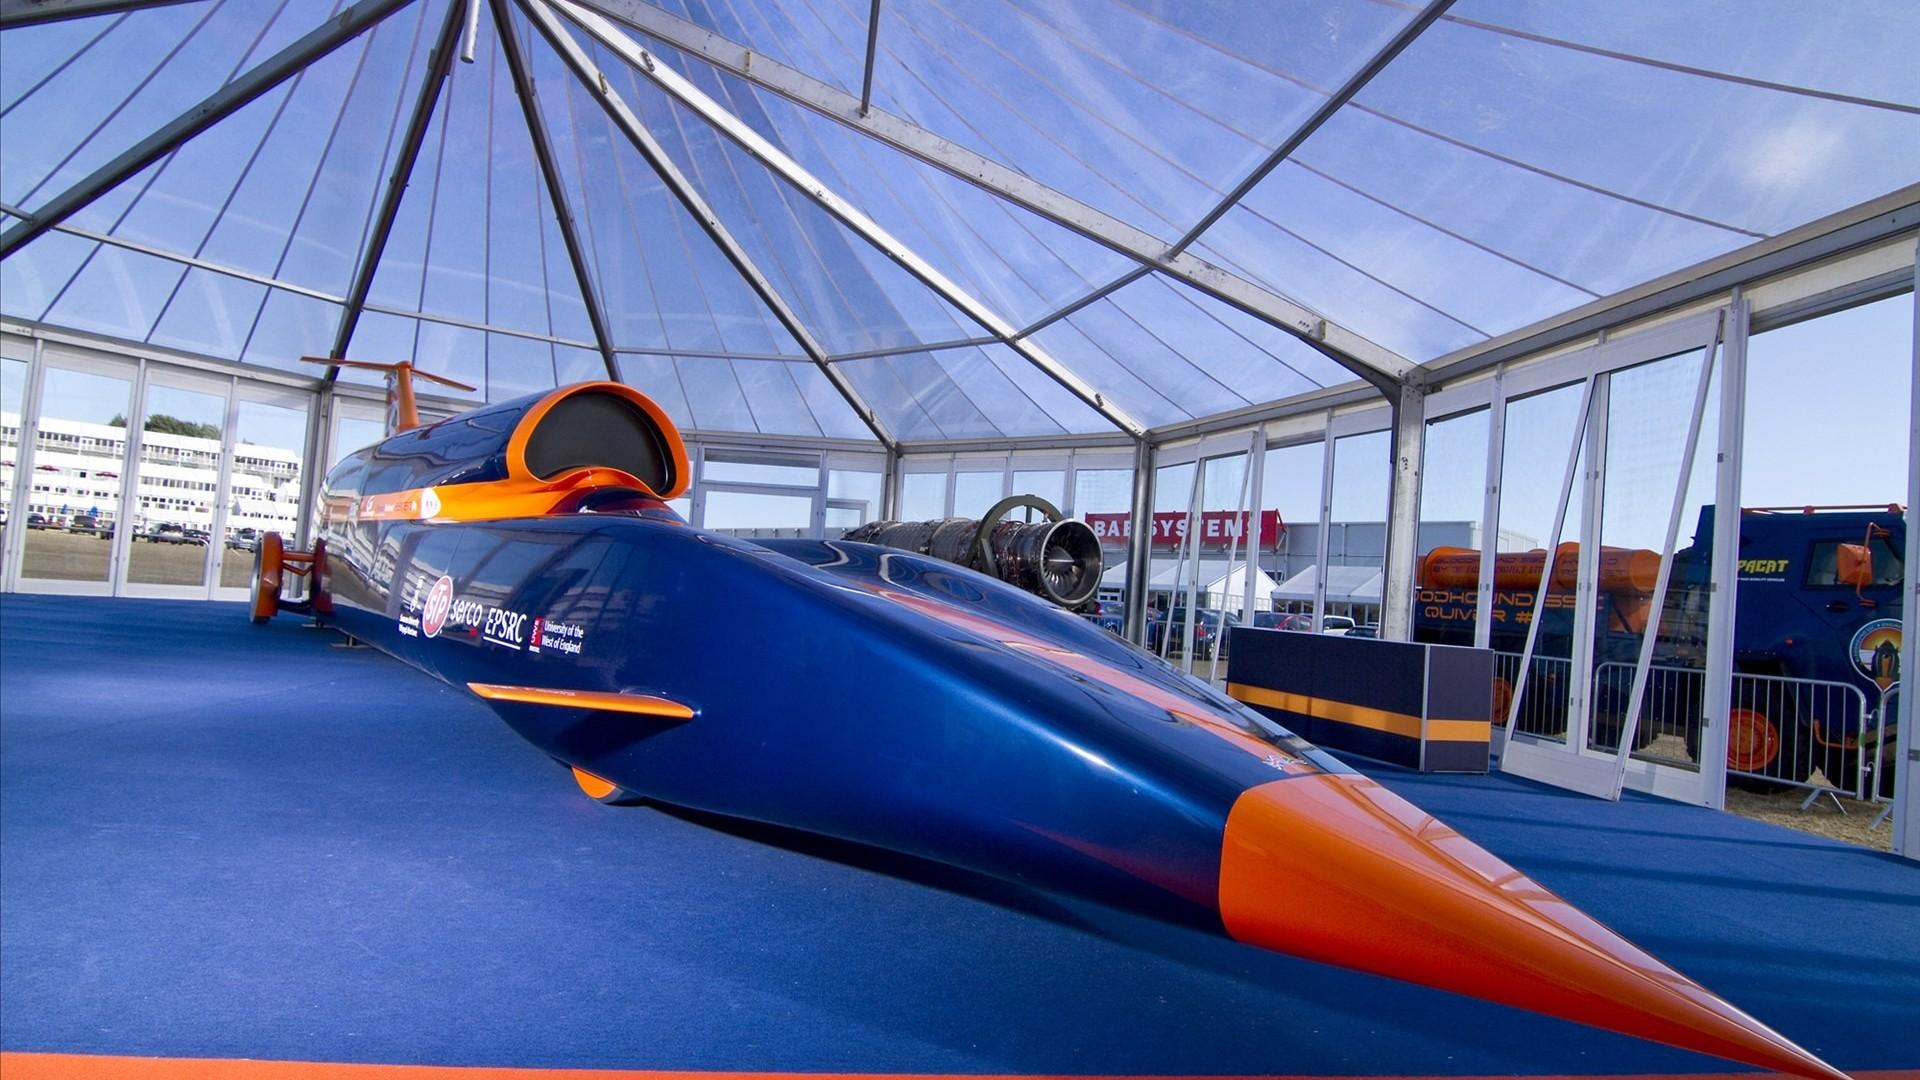 Bloodhound Ssc 1000 Mph Car Wallpaper For Pc,tablet - World Fastest Car Name , HD Wallpaper & Backgrounds